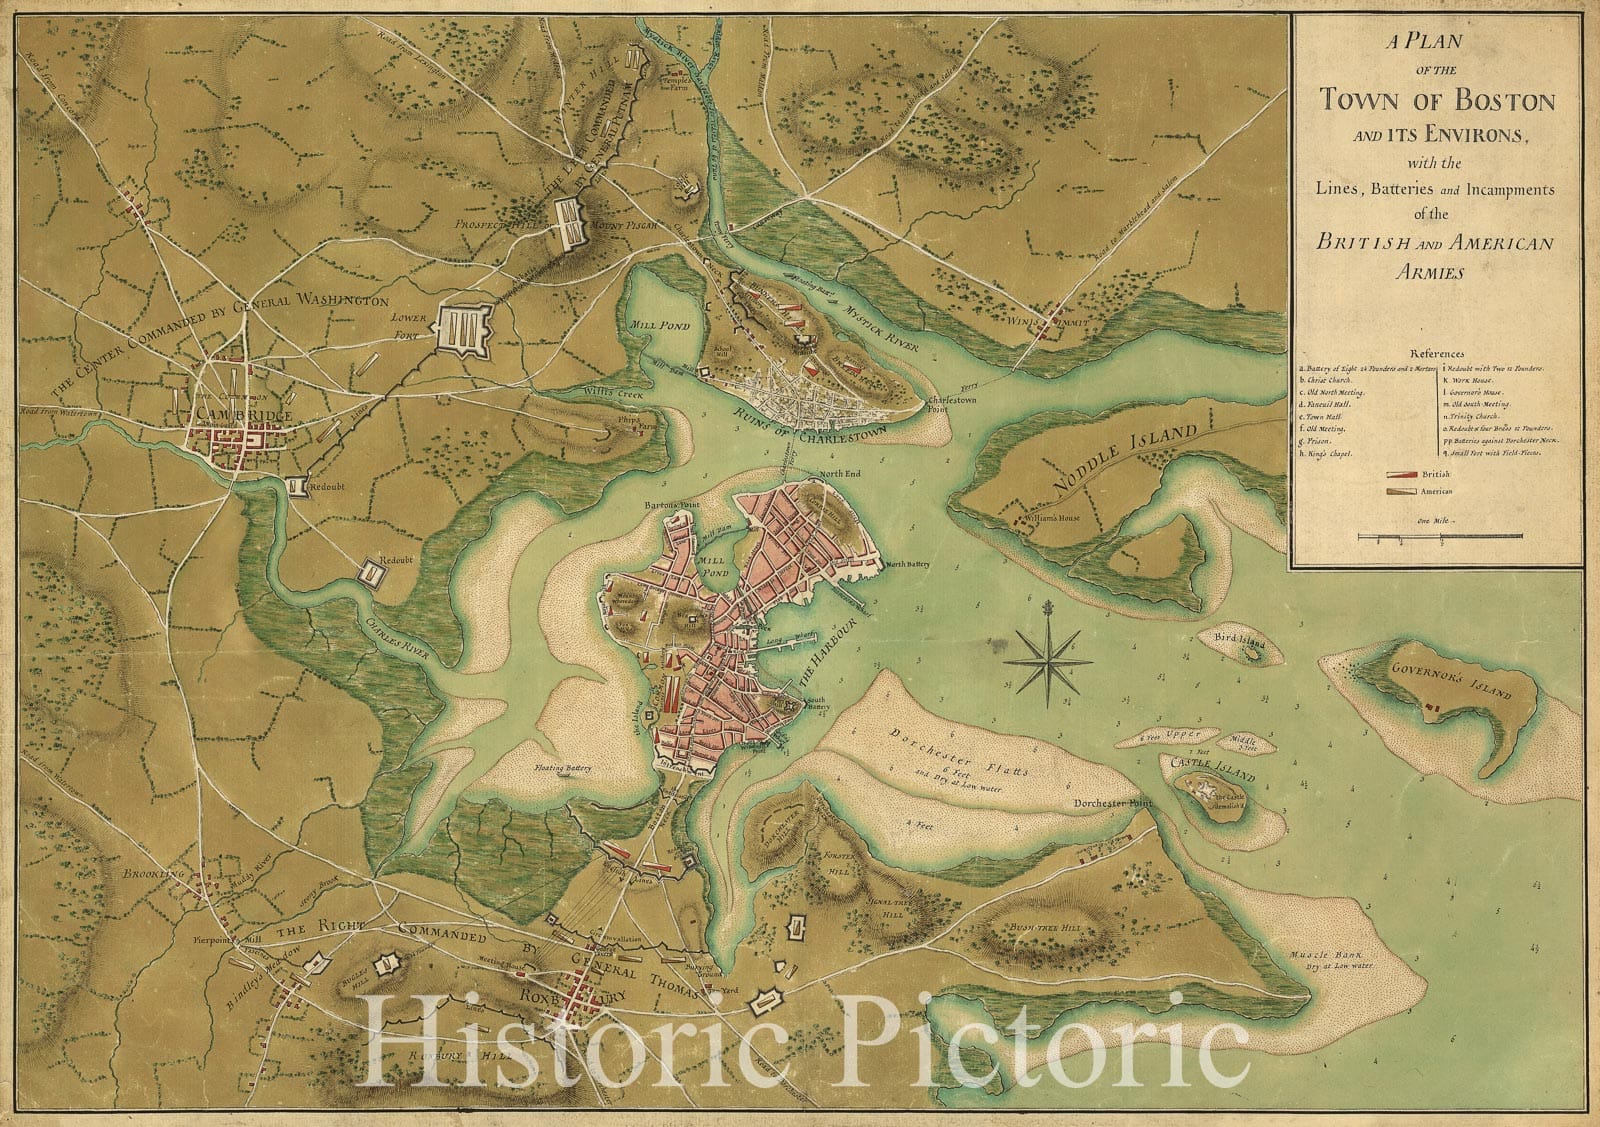 Historical Map, 1776 A Plan of The Town of Boston and its Environs, with The Lines, Batteries, and incampments of The British and American Armies, Vintage Wall Art